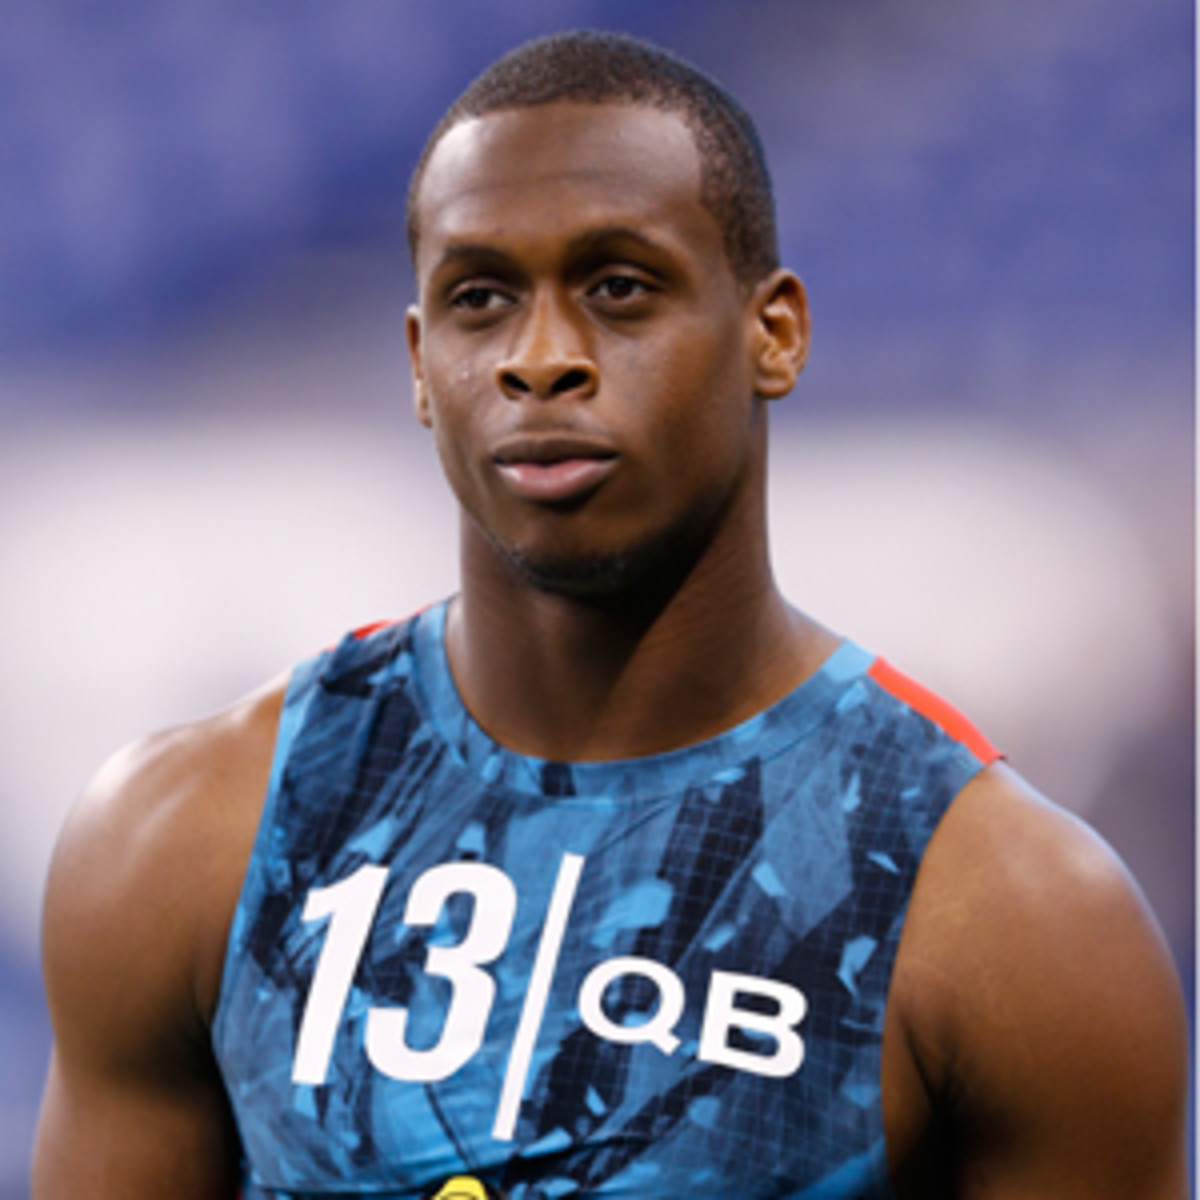 Geno Smith fired his agents four days after falling to the second round of the NFL Draft. (Joe Robbins/Getty Images)